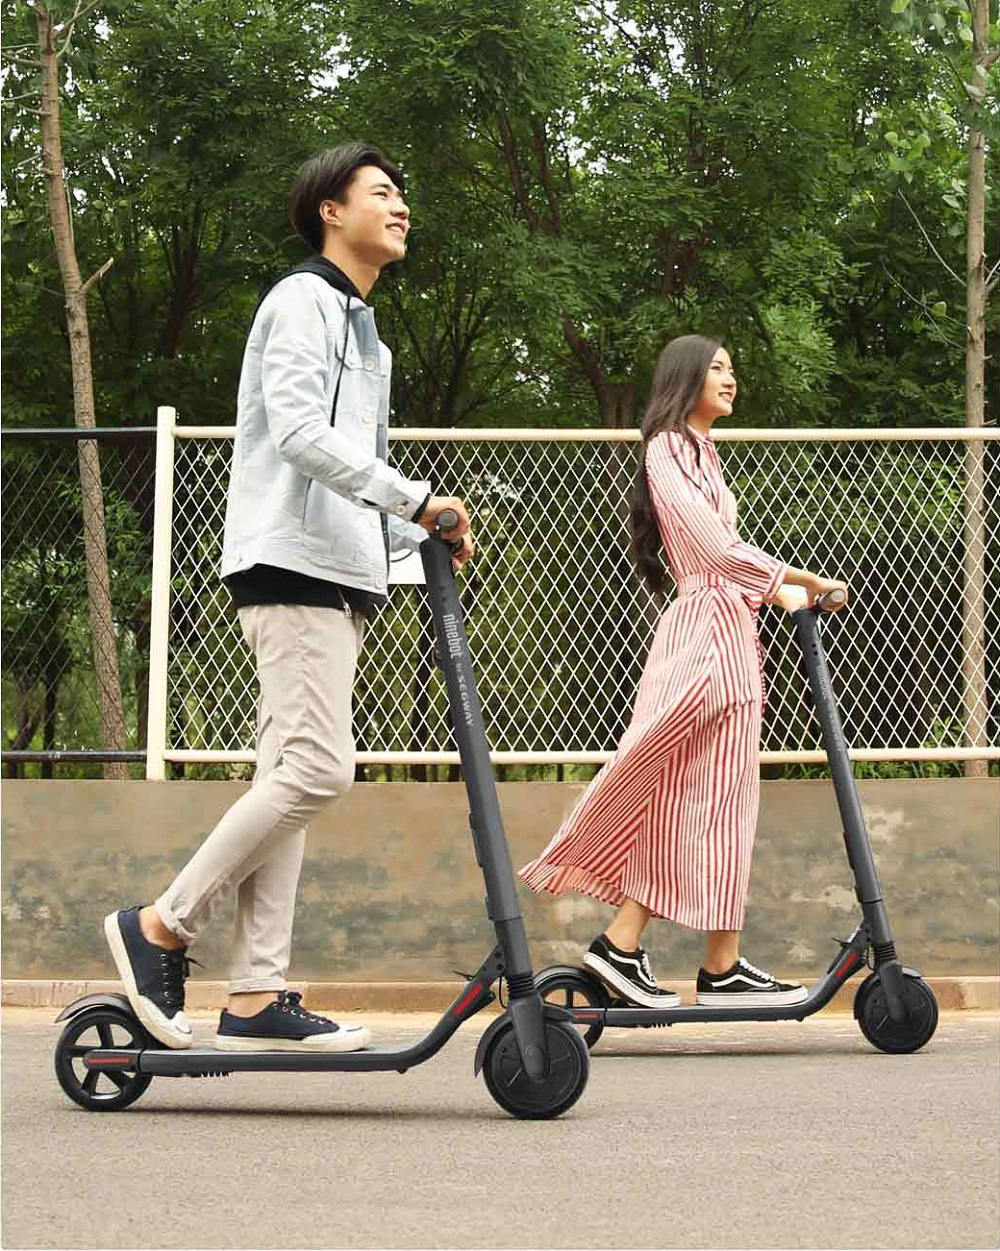 Xiaomi Ninebot Segway KickScooter ES2 Folding Electric Scooter Sports Vision 700W Motor 25km/h Speed With LED Lights - Black